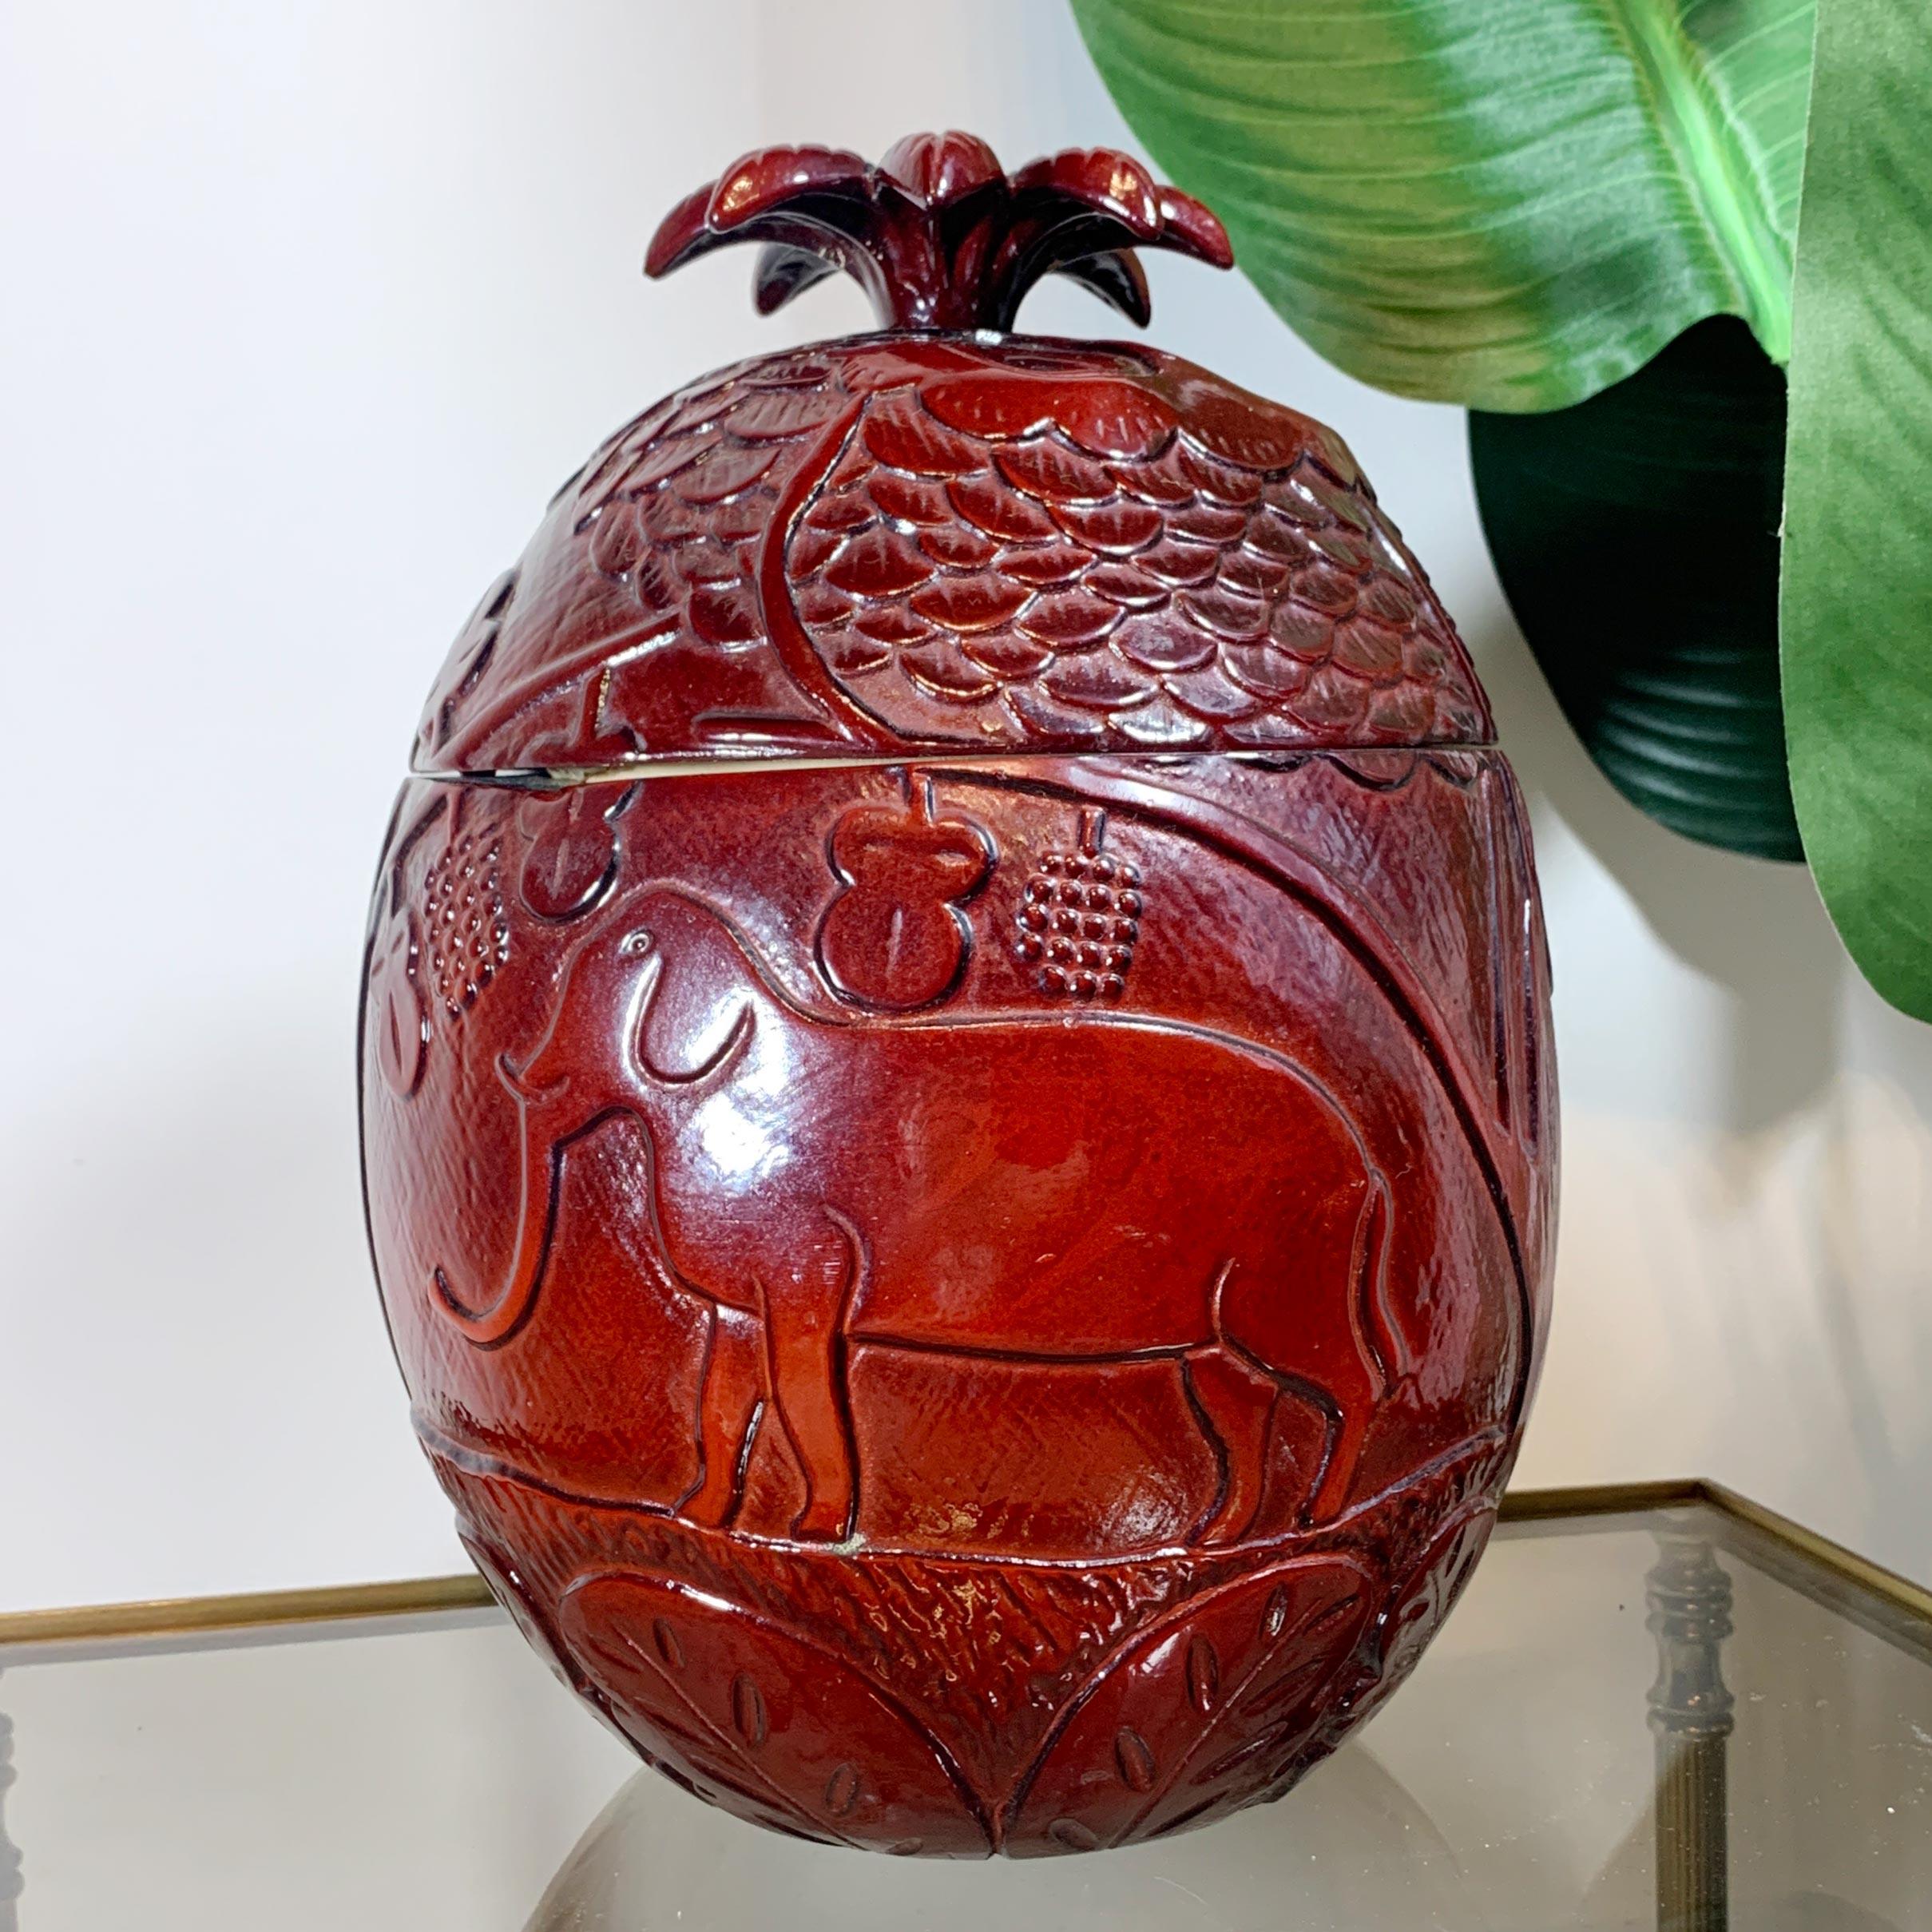 An exceptional and very rare resin modernist ice bucket, decorated in deep burgundy, attributed to the works of the pioneering modernist French artist Marc Chagall.

The ice bucket is adorned with various embossed images of deer, elephant, owl and